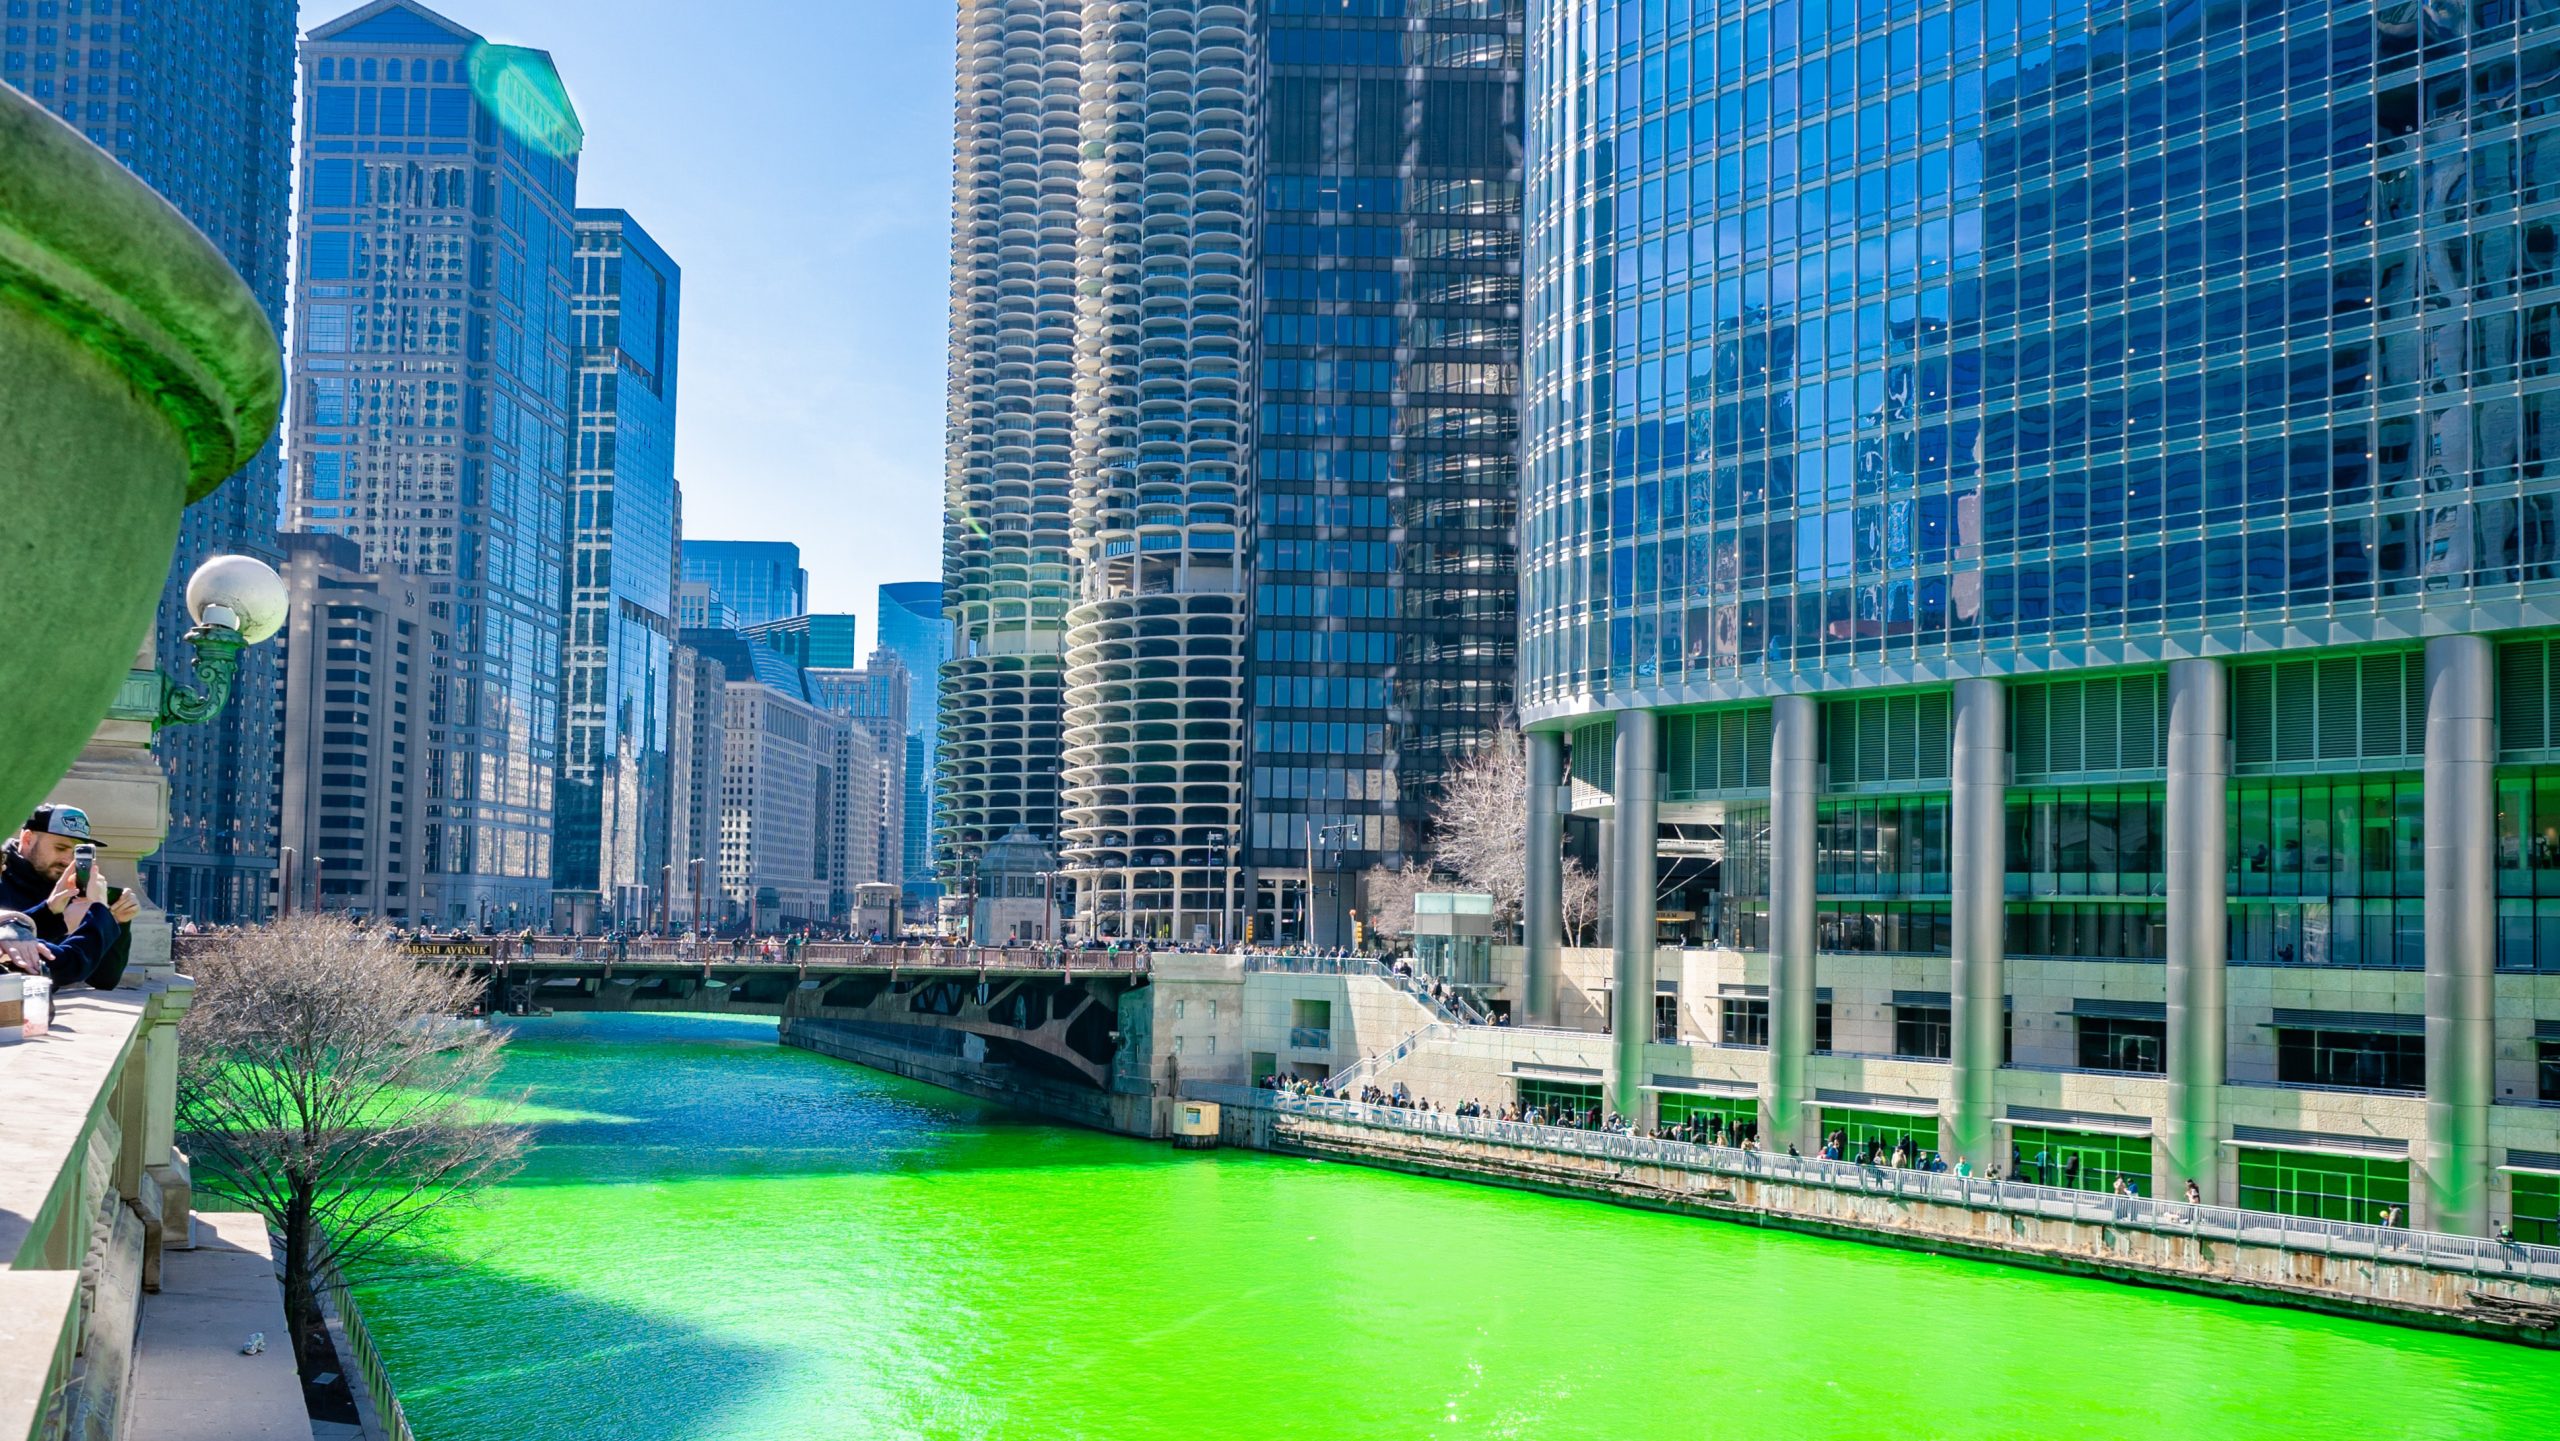 St. Patrick's Day in Chicago |